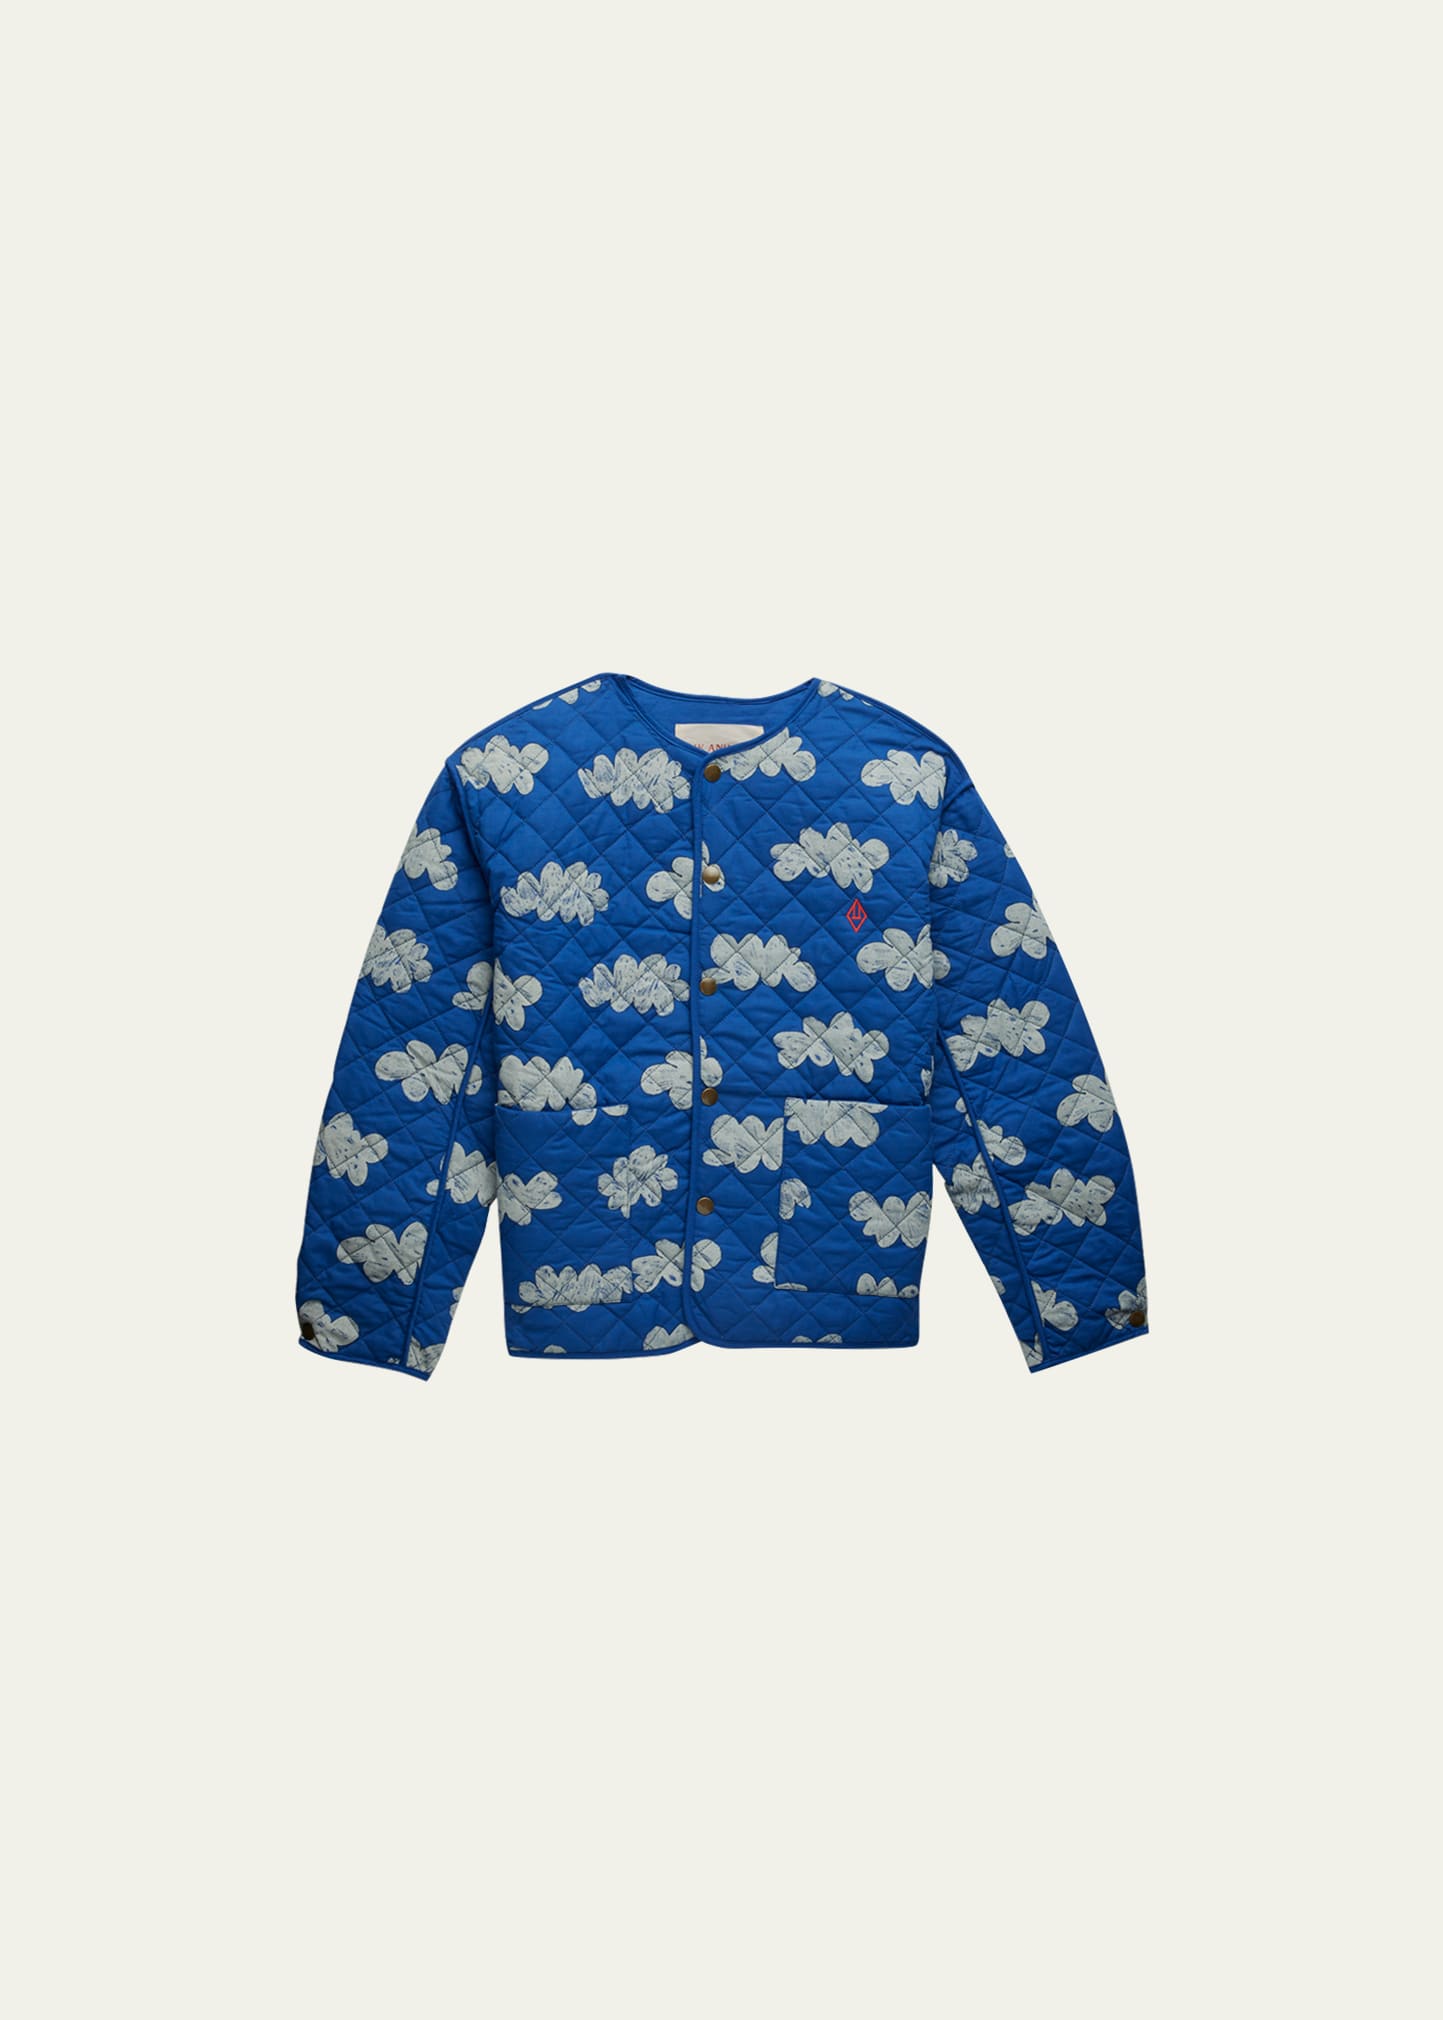 The Animals Observatory Reversible Blue Jacket For Kids With White Clouds